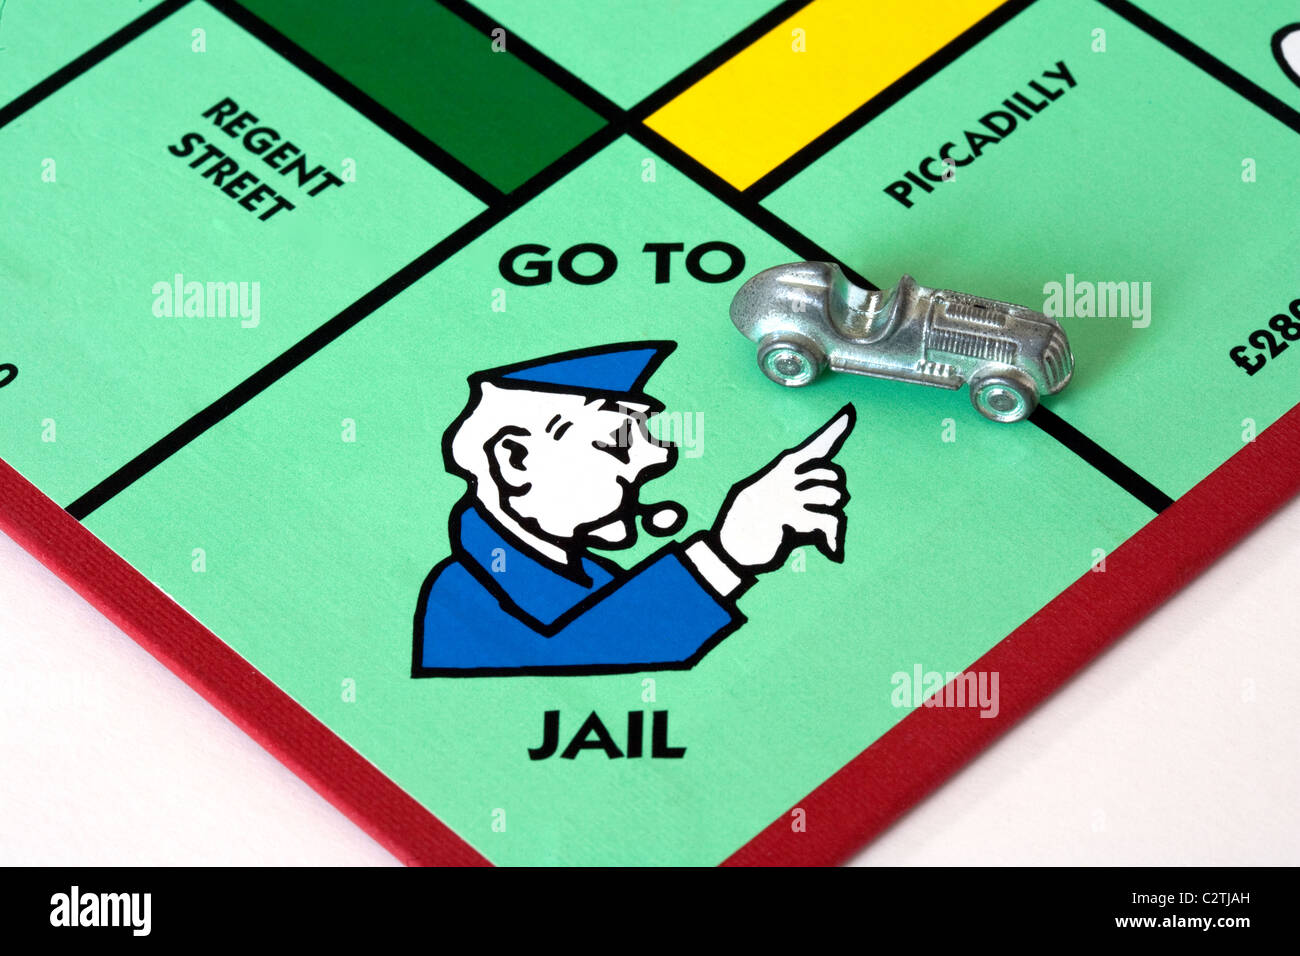 Bad Driver; A car on the 'Go to Jail' space on a monopoly game board UK Stock Photo